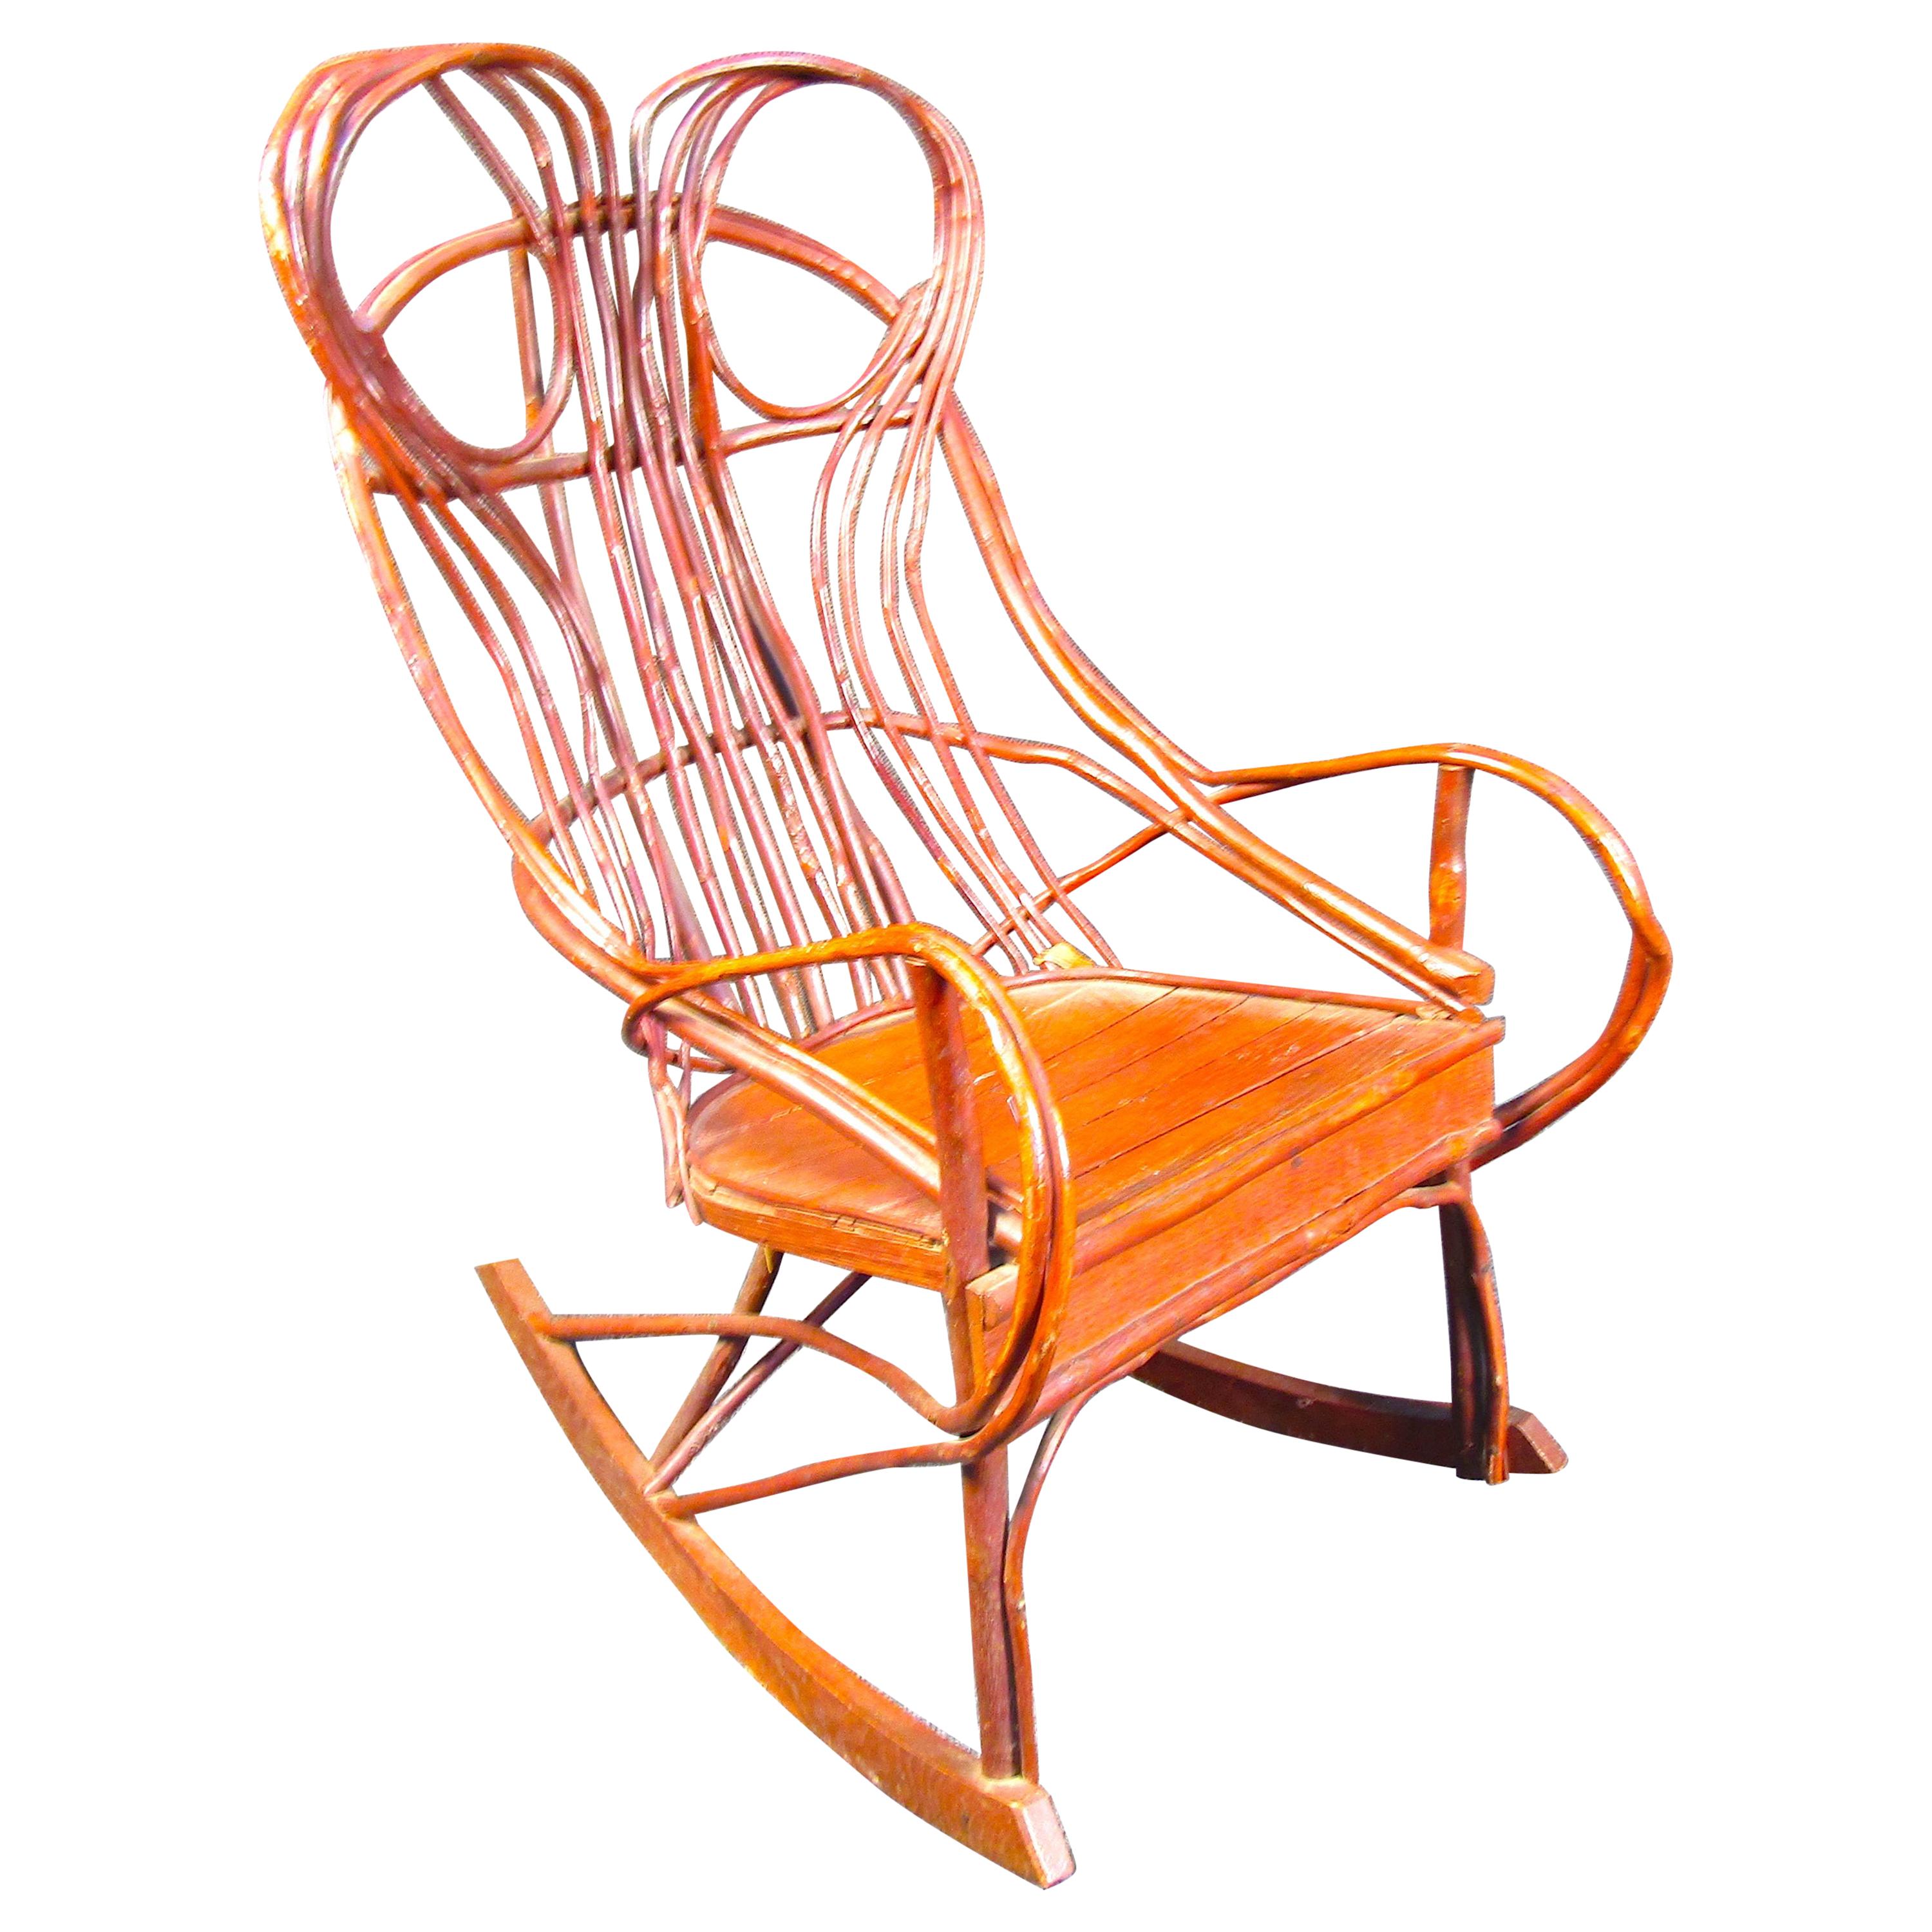 Midcentury "Woven Branch" Rocking Chair For Sale